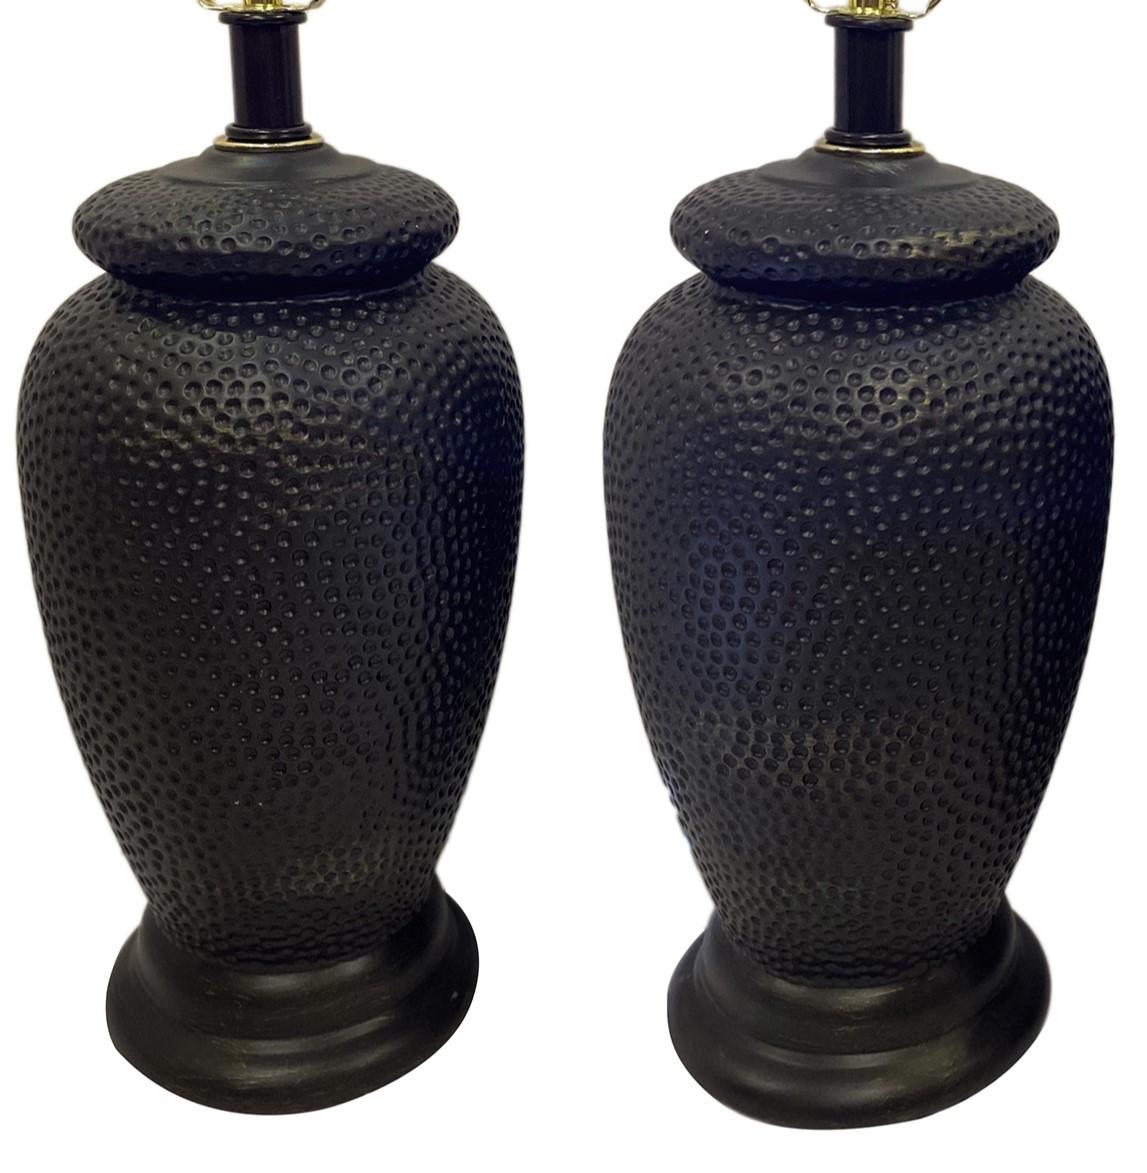 Pair of circa 1960s French ceramic lamps with hammered texture.

Measurements:
Height of body: 15″
Height to rest of shade: 24.5″
Diameter: 8″